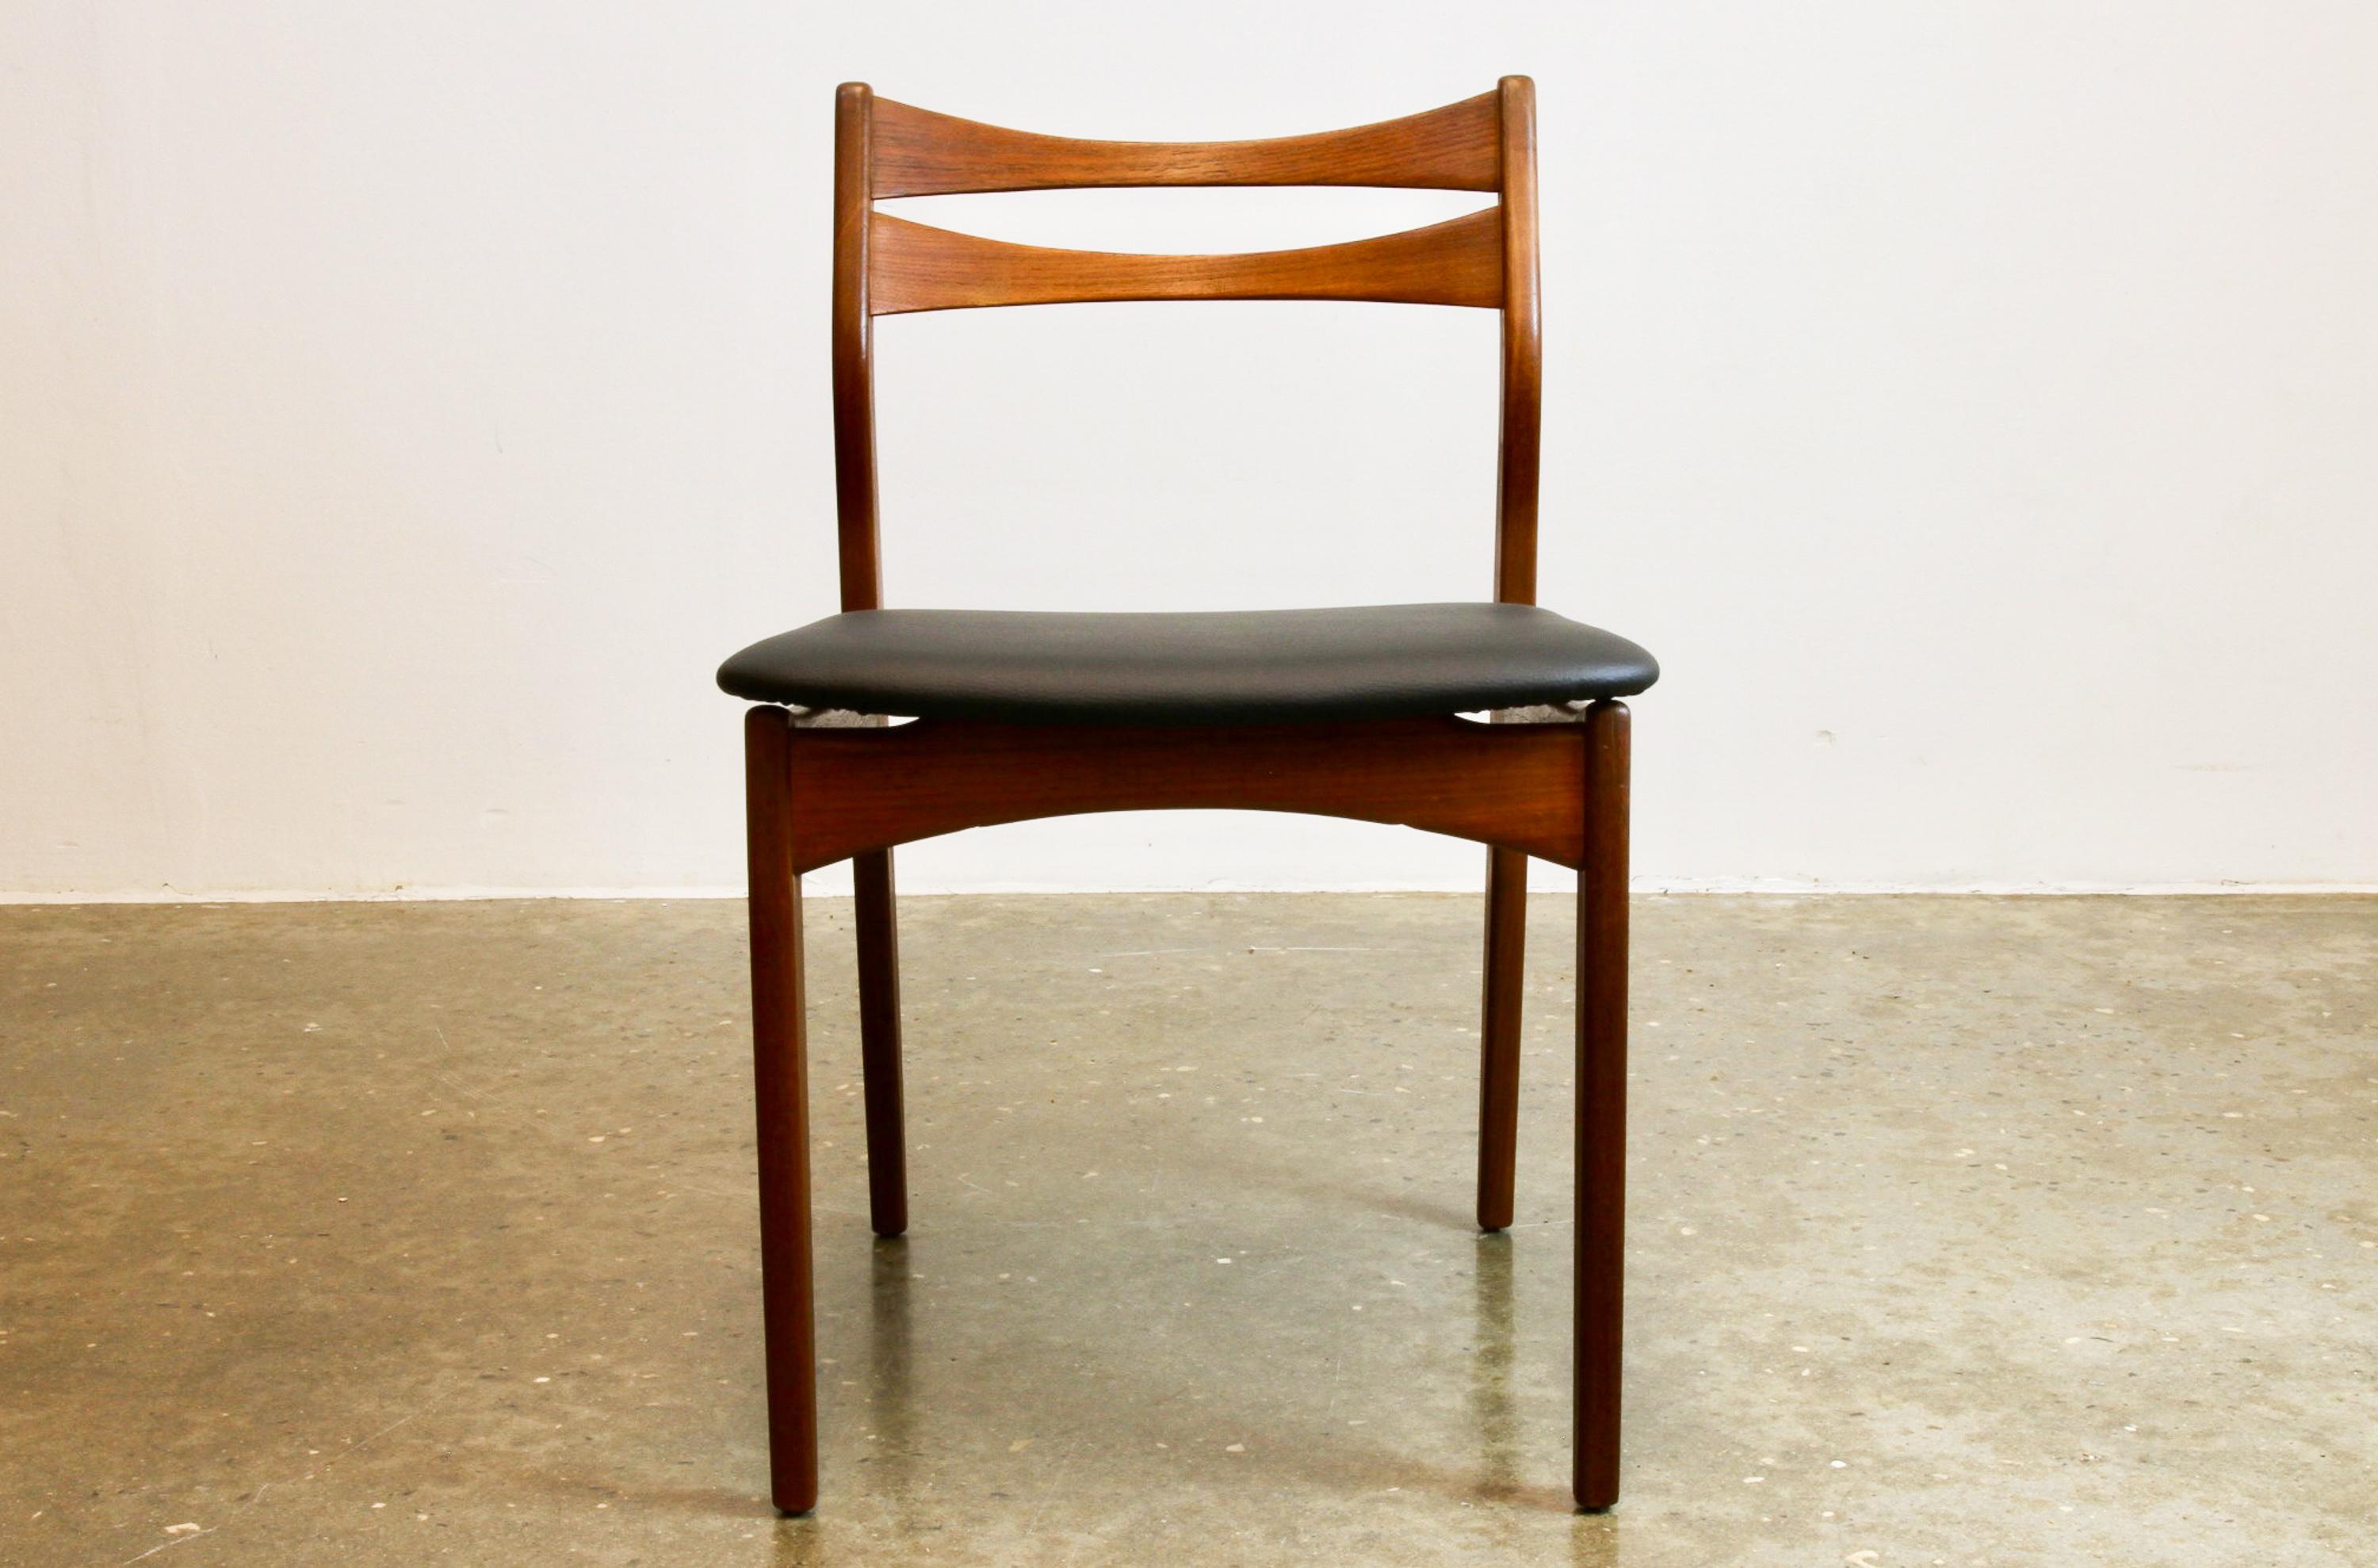 Danish teak dining chairs 1960s Set of 4.
Elegant Danish dining chairs in solid teak. Sculpted backrests makes these chairs very comfortable. A very Classic type of midcentury modern furniture from Denmark in the 1960s. The skill and craftsmanship